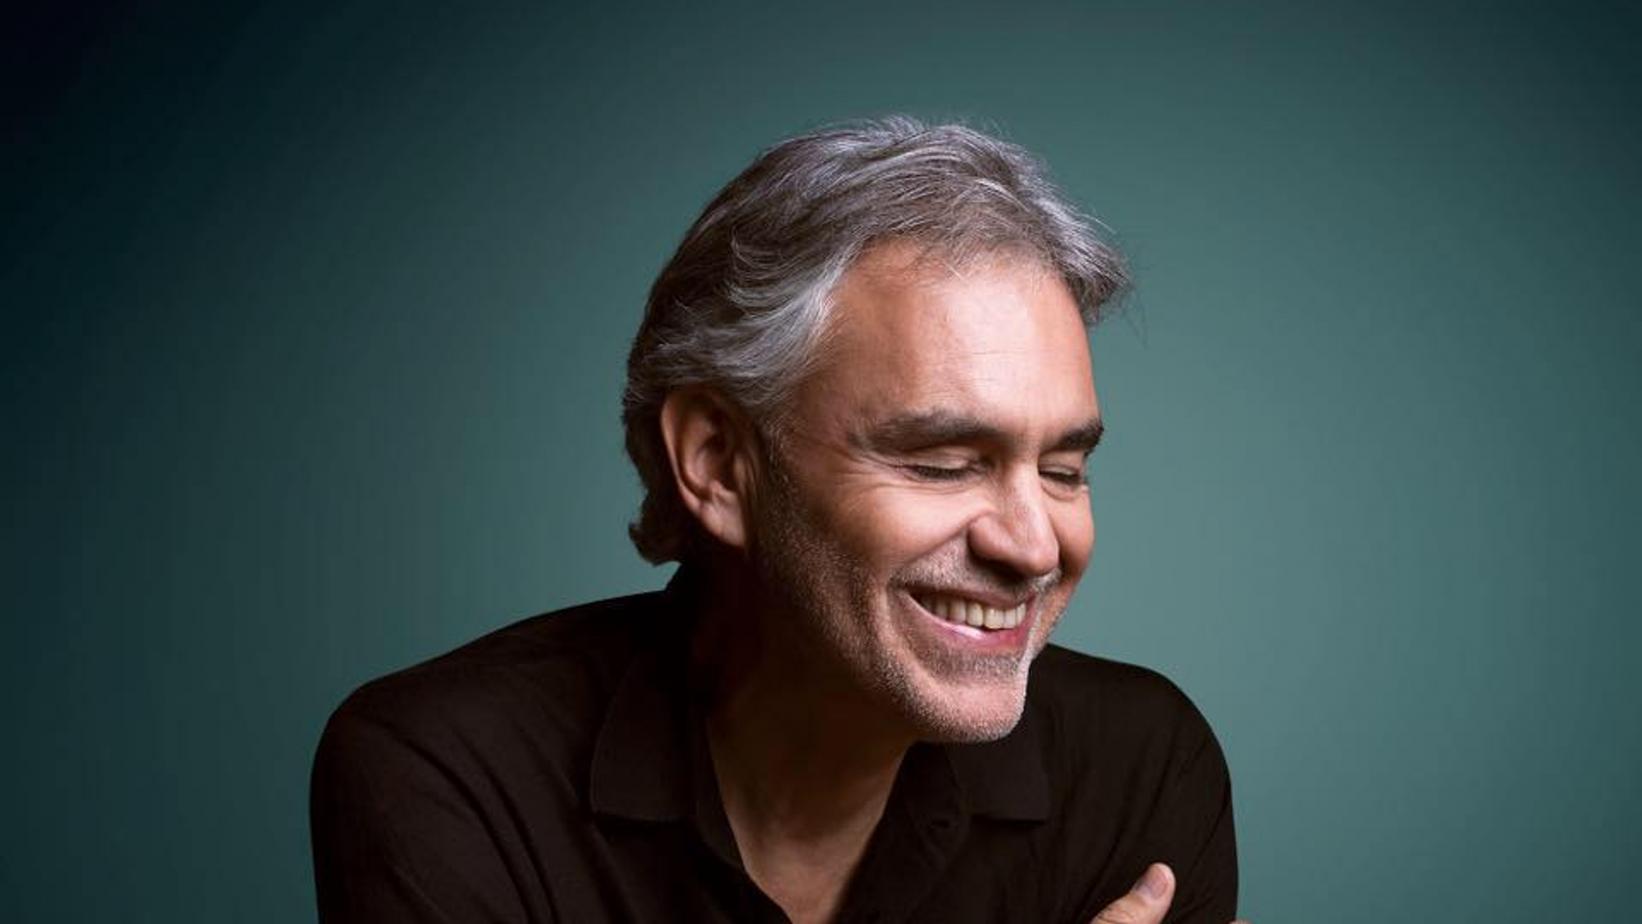 AndreaBocelli-16-9-1574344152